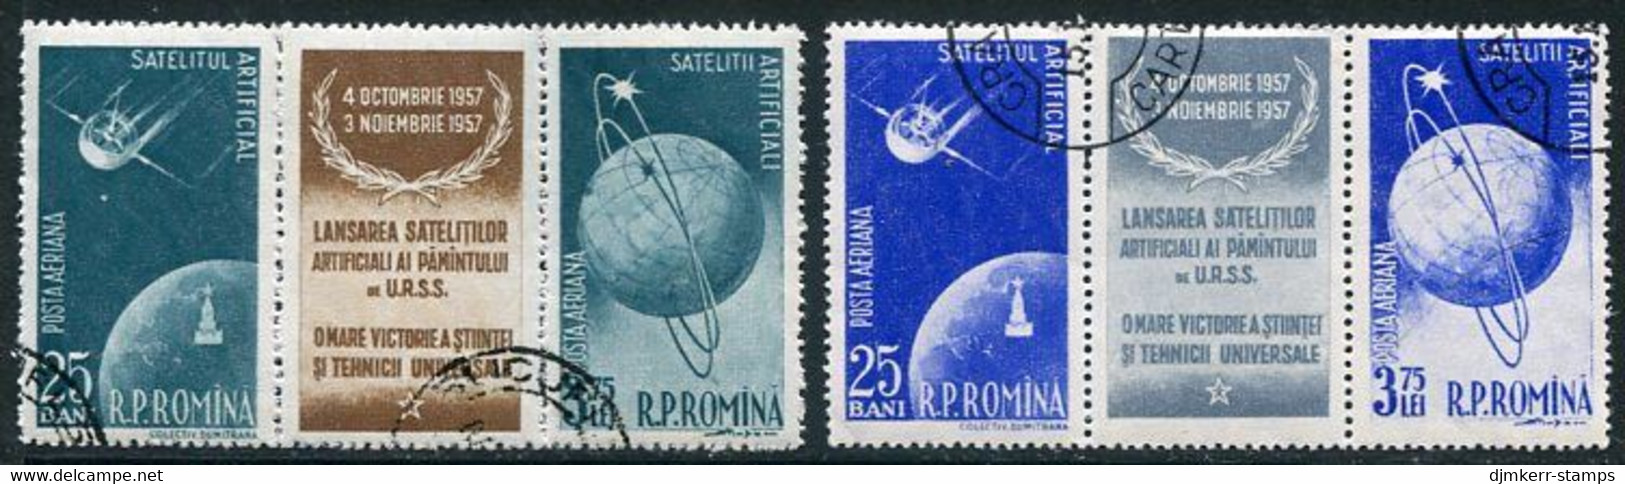 ROMANIA 1957 Launch Of First Earth Satellites Strips Used.  Michel 1677-80 - Usati